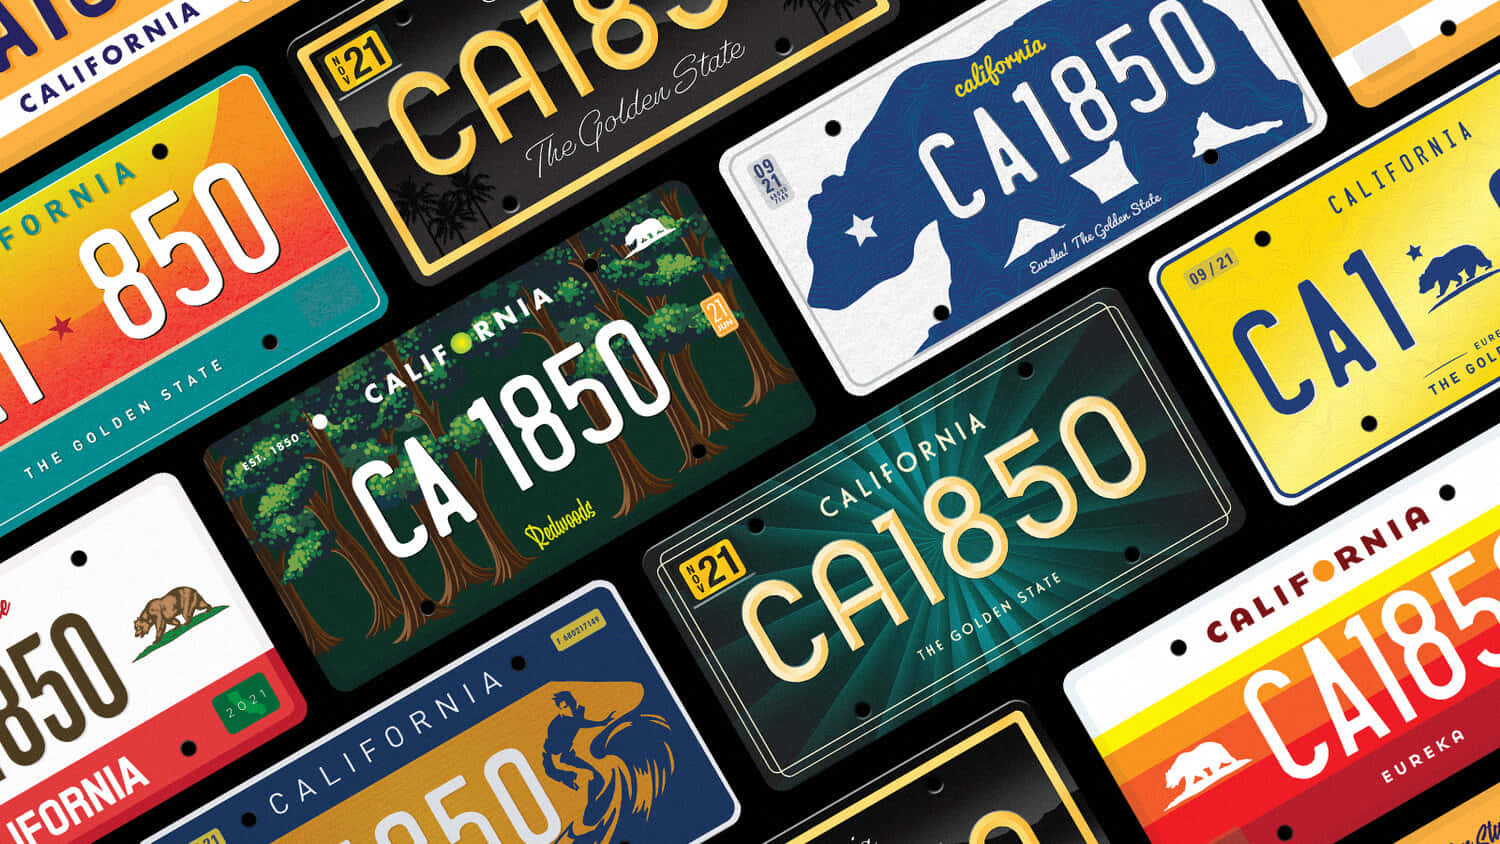 States of License Plates